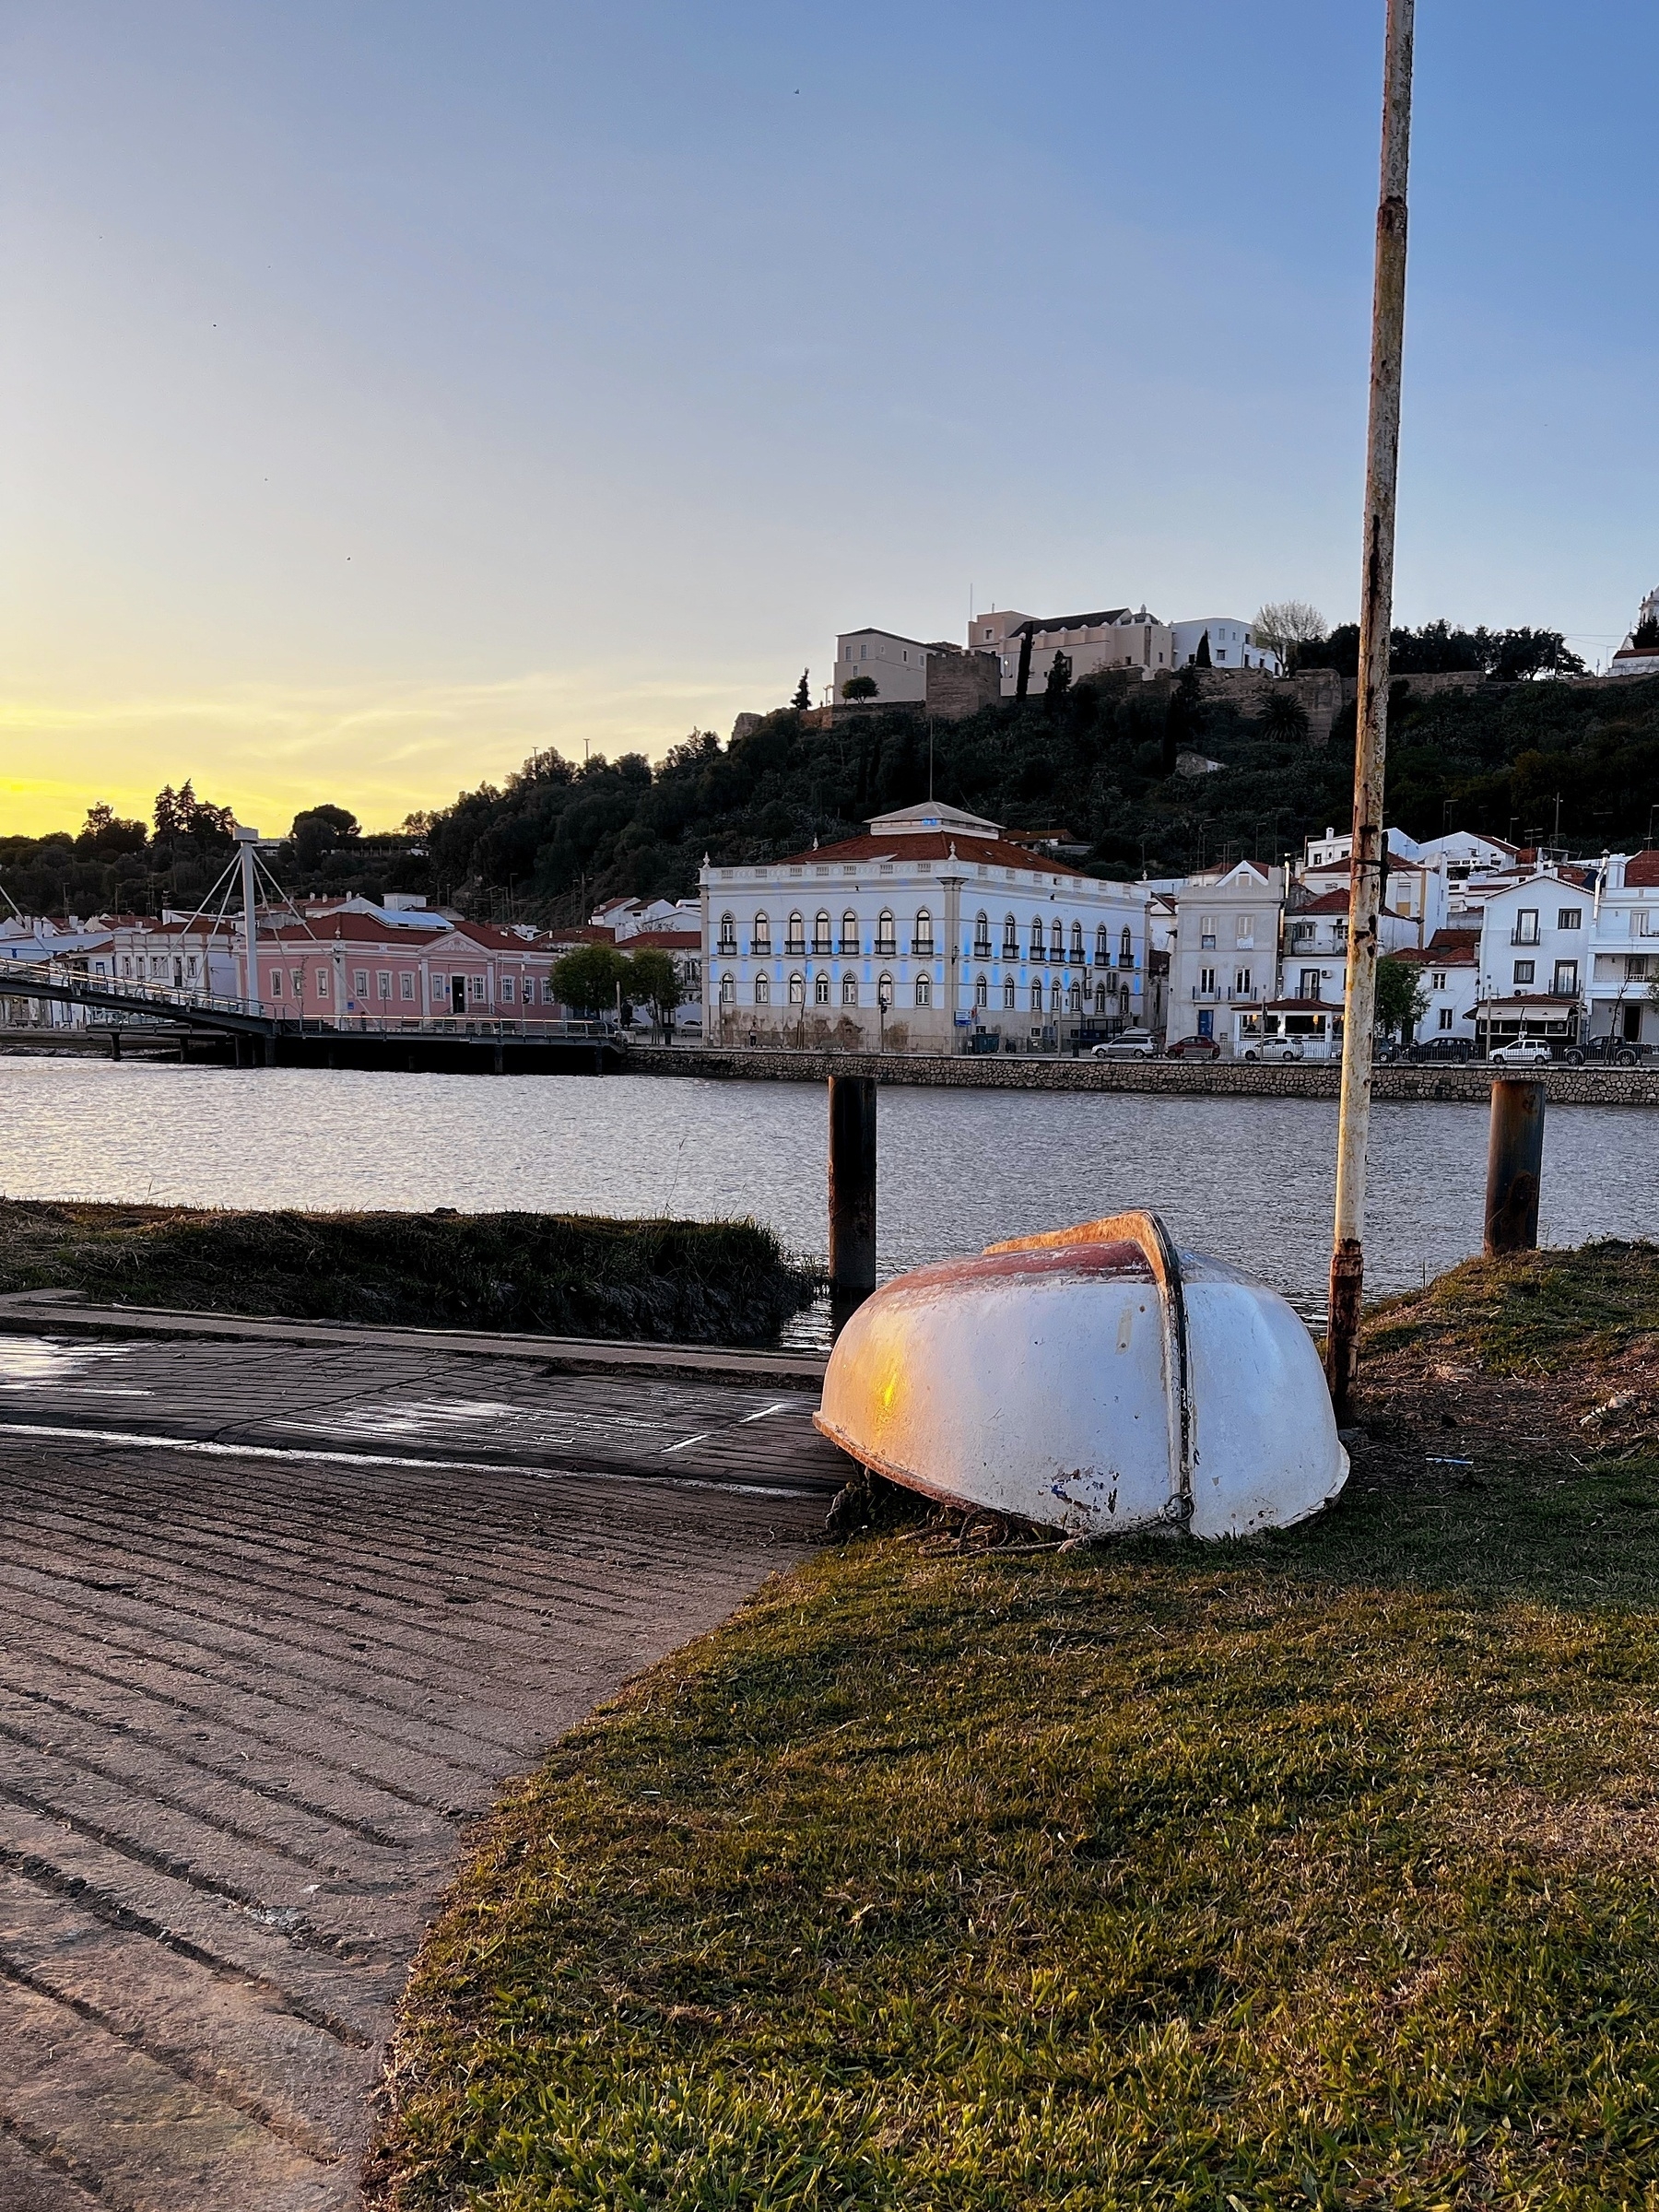 Evening light in Alcácer do Sal, setting sunlight reflected on the hill of an upturned rowing boat by the river